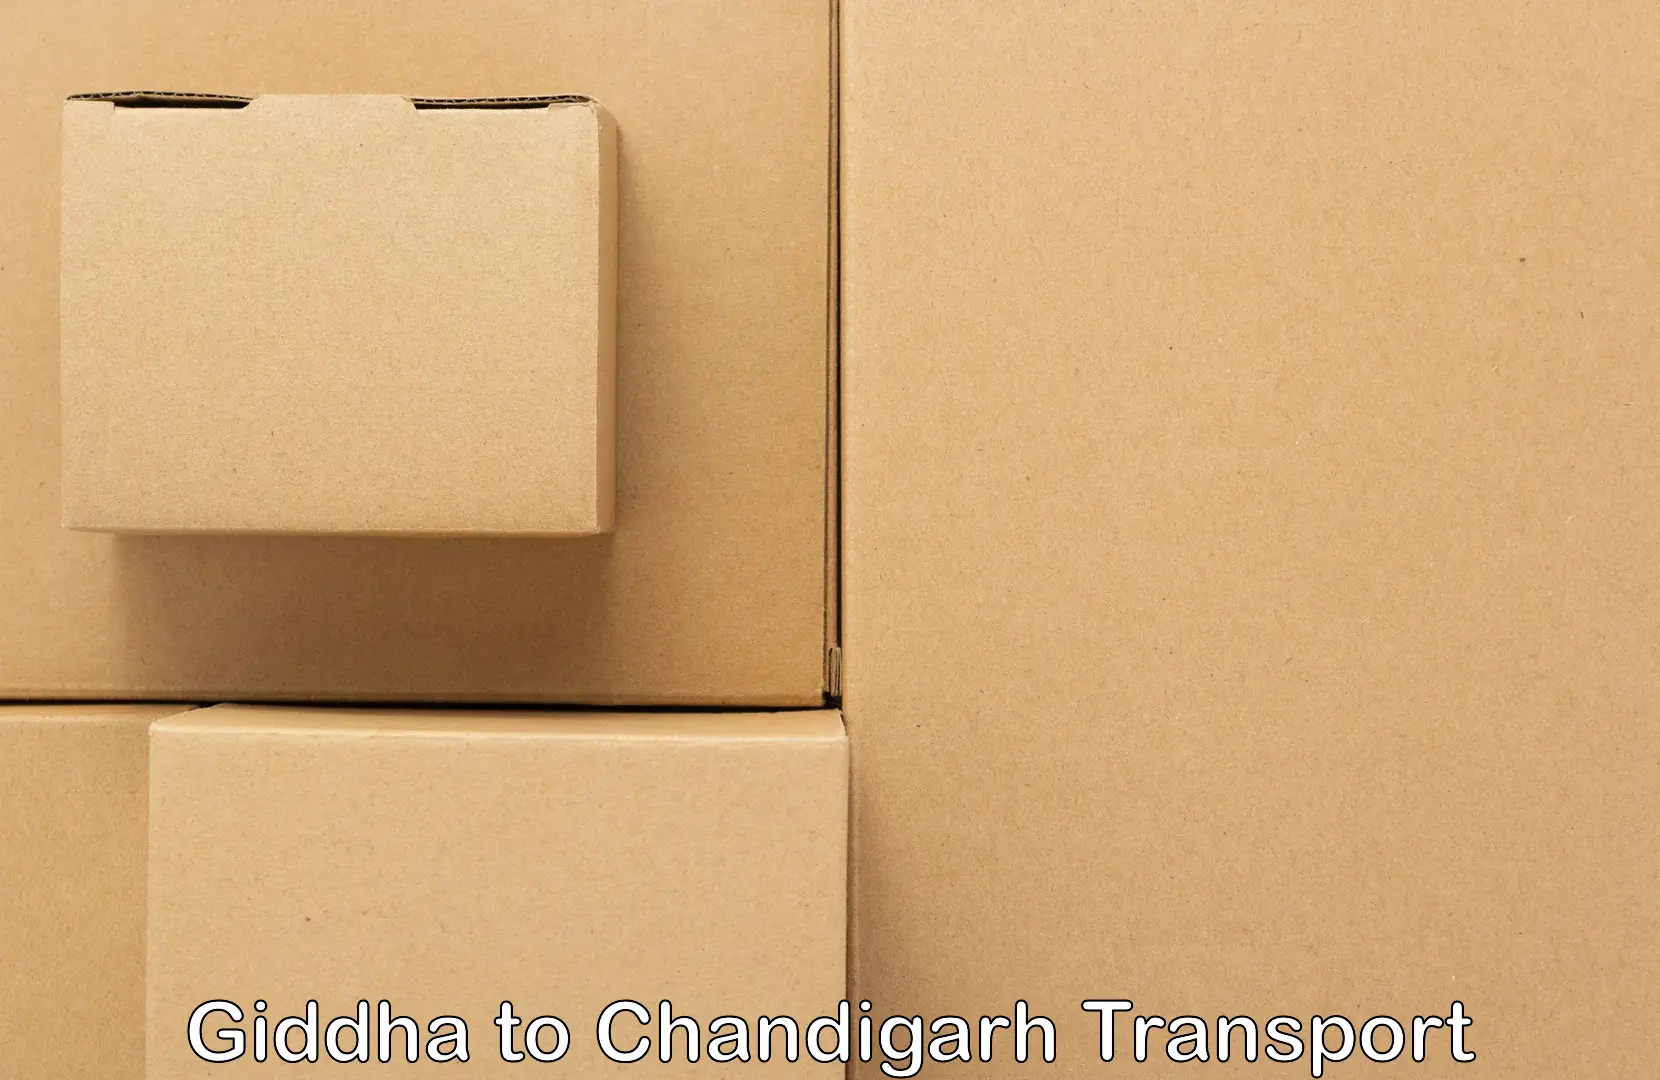 Delivery service Giddha to Chandigarh